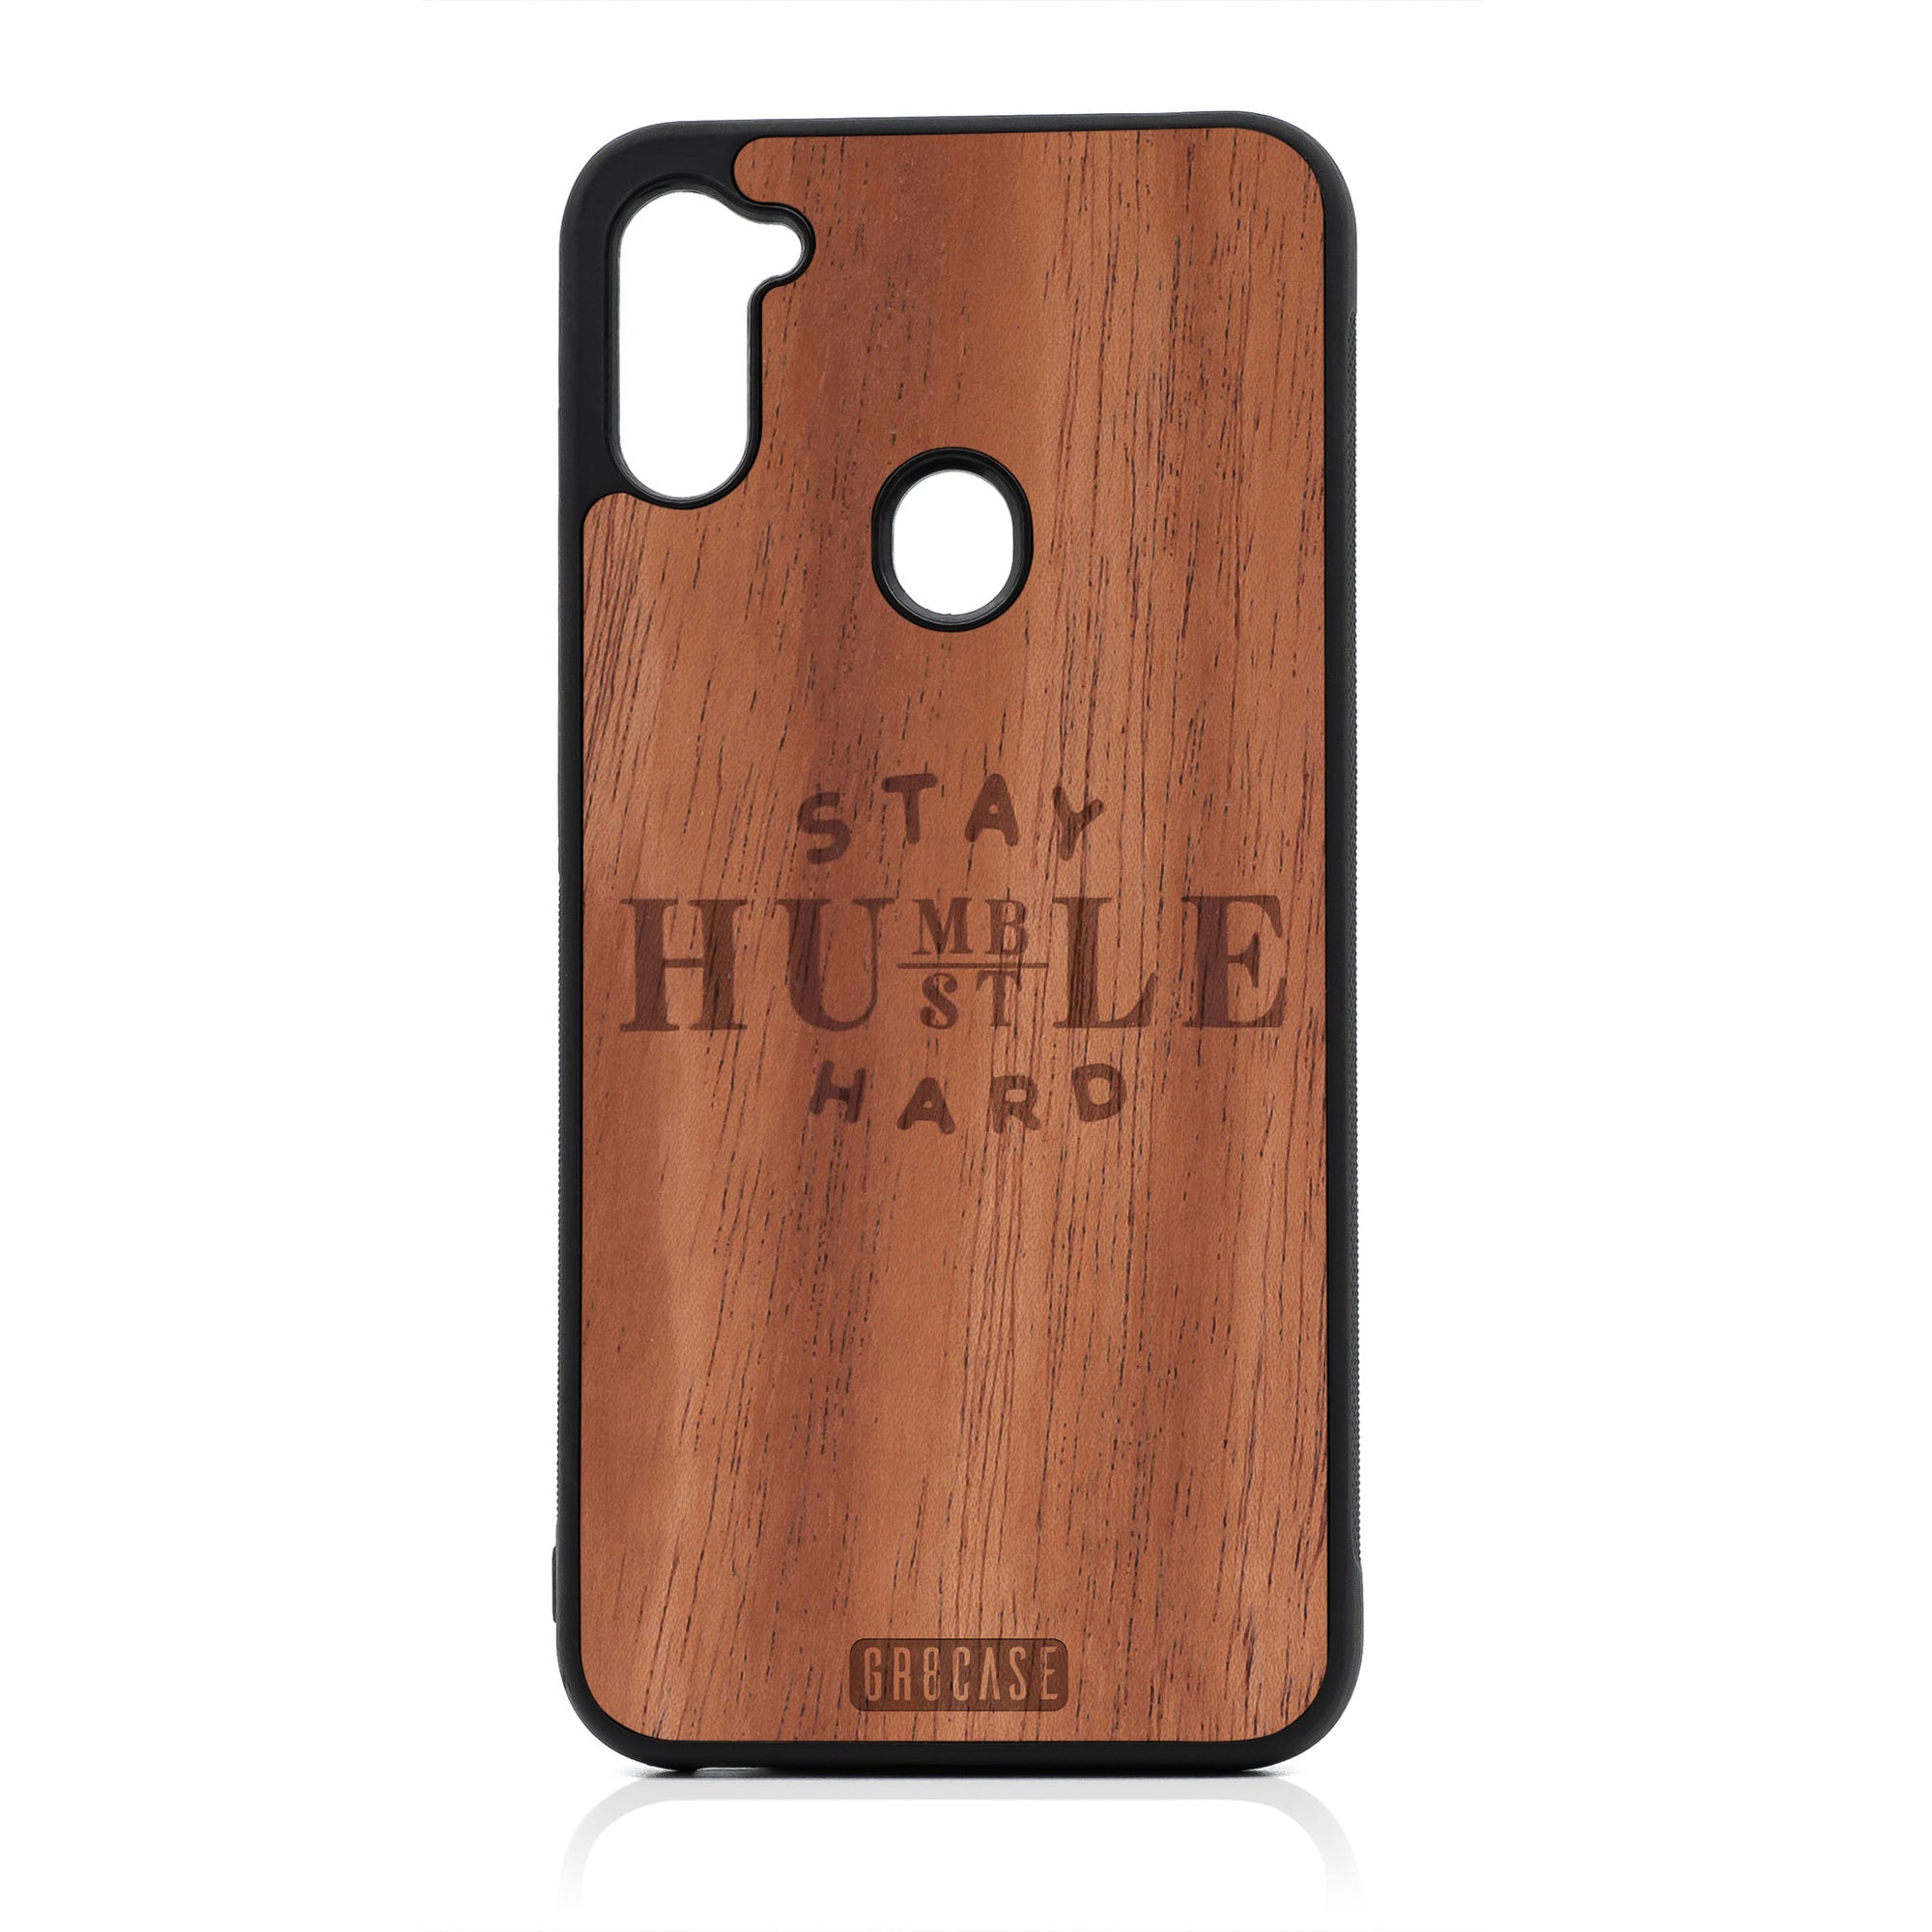 Stay Humble Hustle Hard Design Wood Case For Samsung Galaxy A11